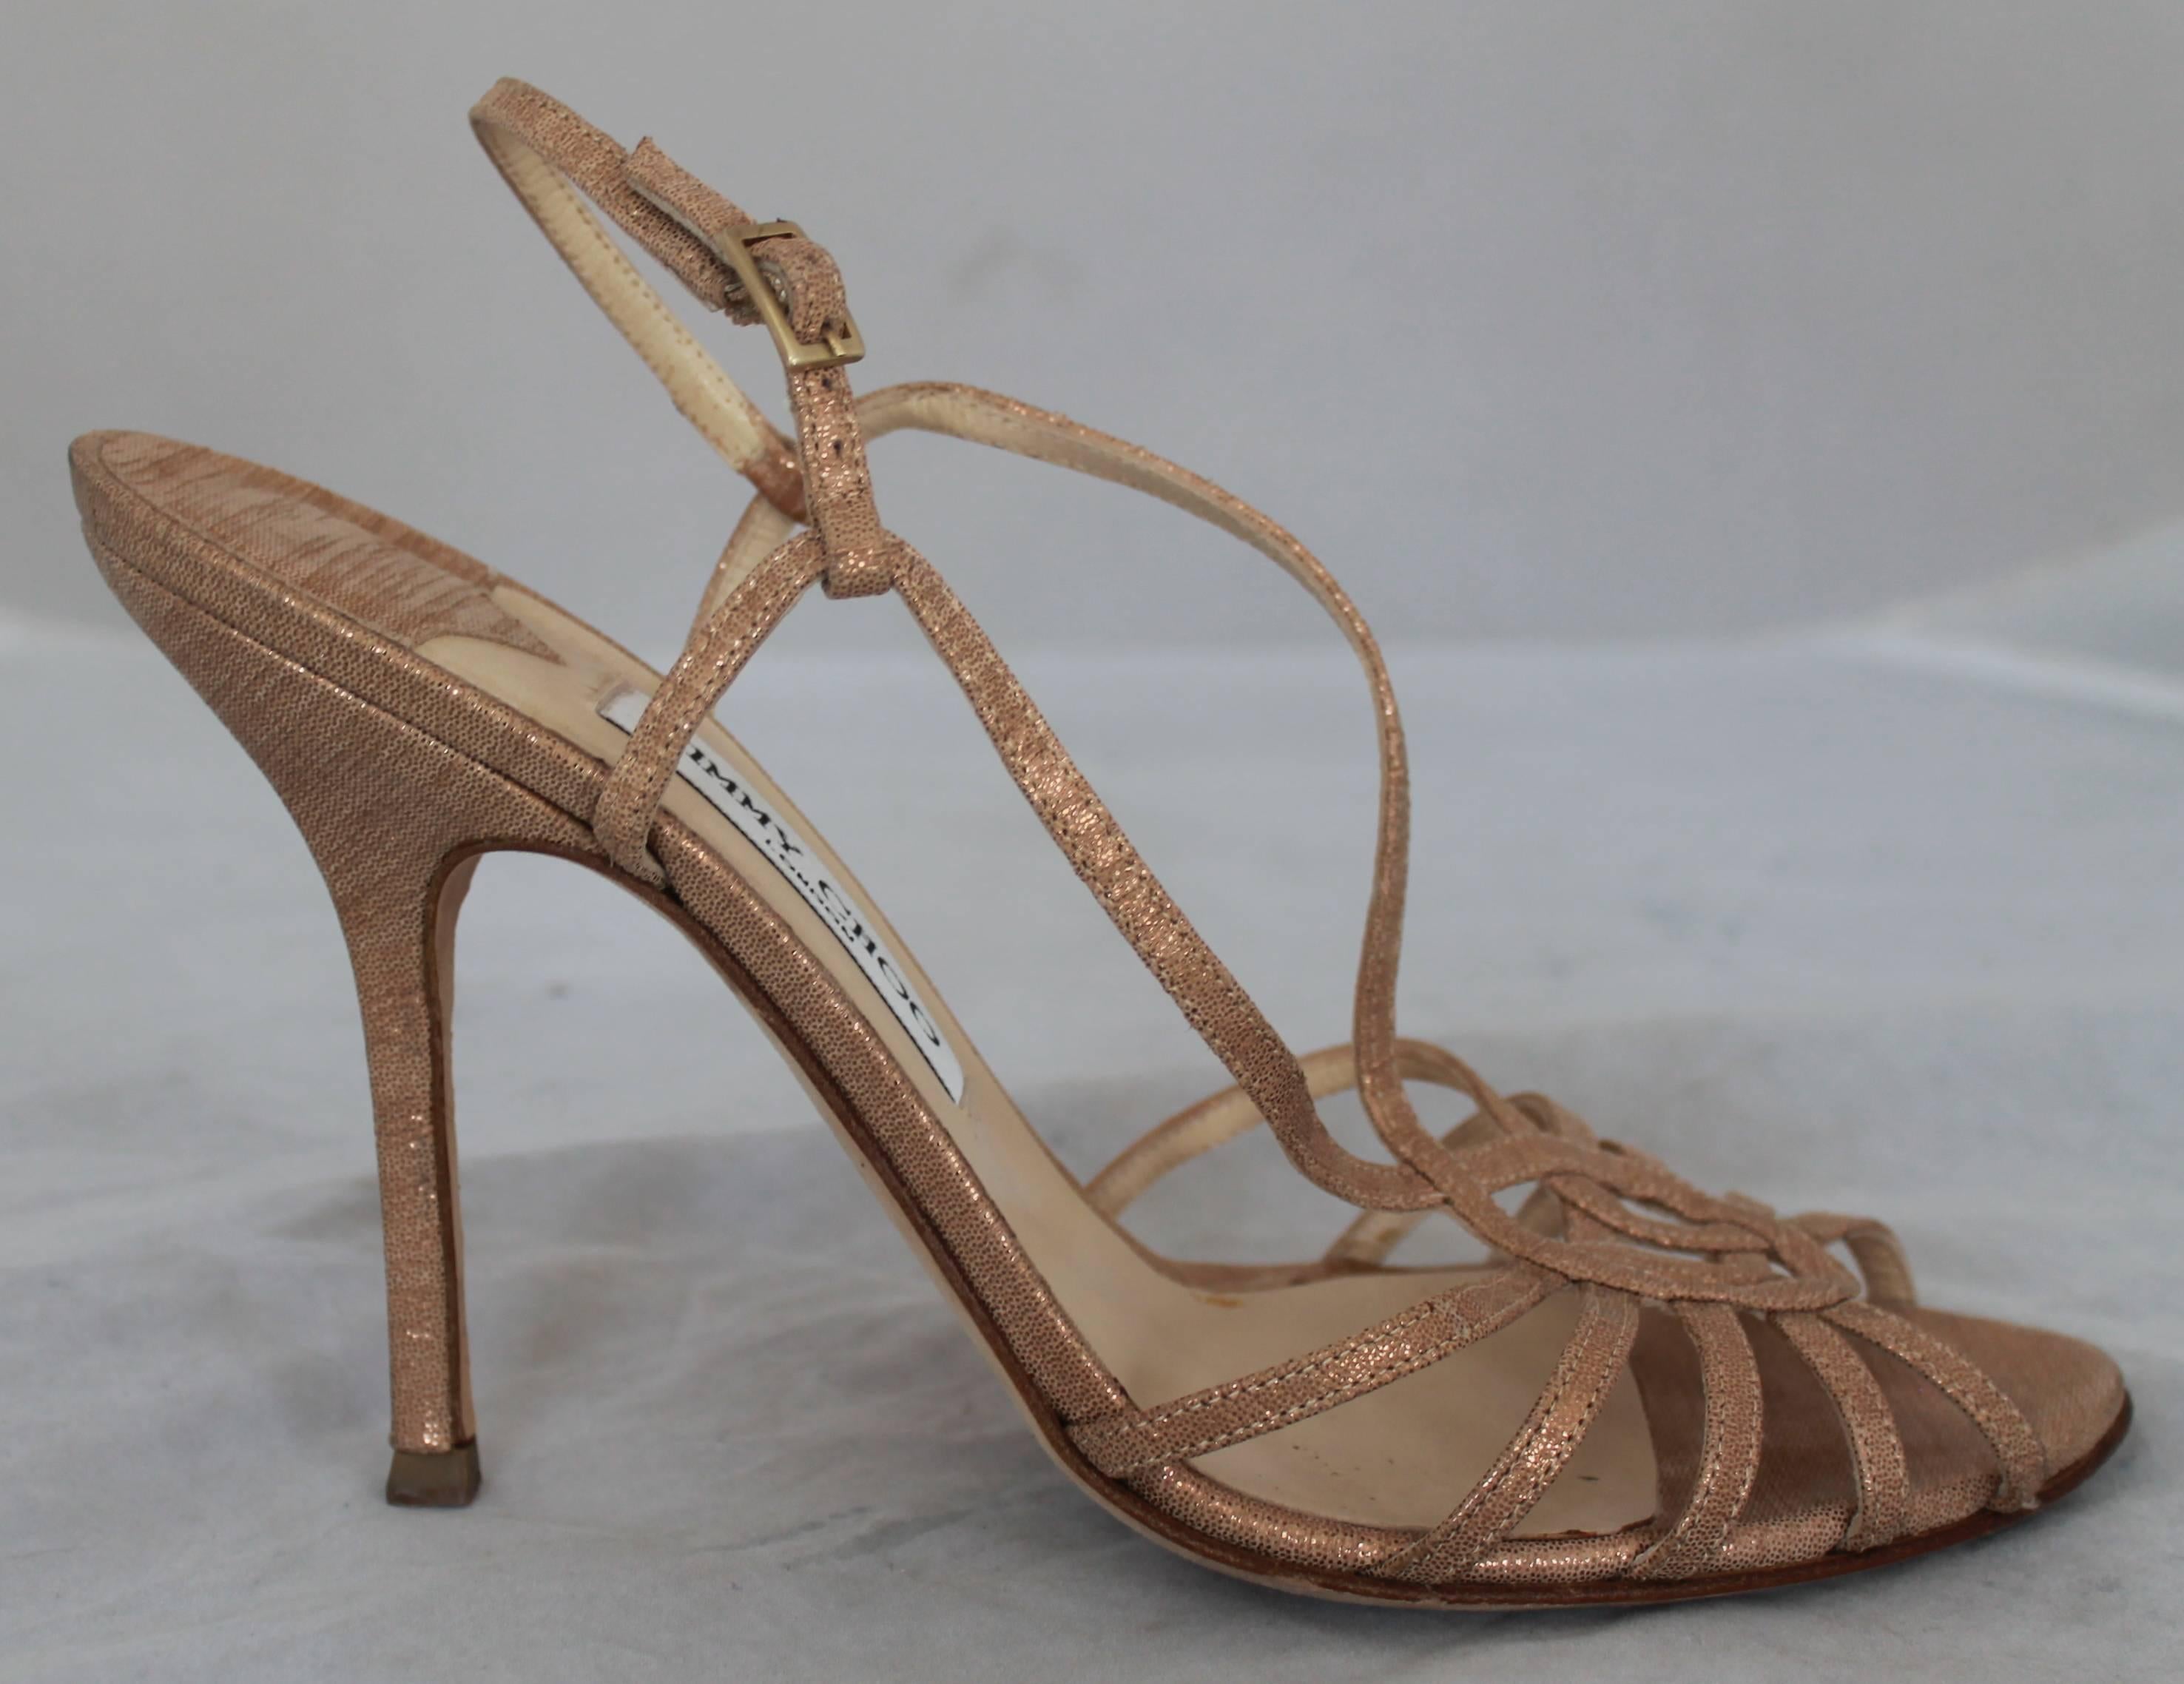 Jimmy Choo Rose Gold Sparkly Slingback Heel  40.5.  These beautifully elegant shoes are in good condition with only some noticeable wear on the sole and on the top of the heel.  They have a lovely strappy toe design.

Measurements:
Heel: 4